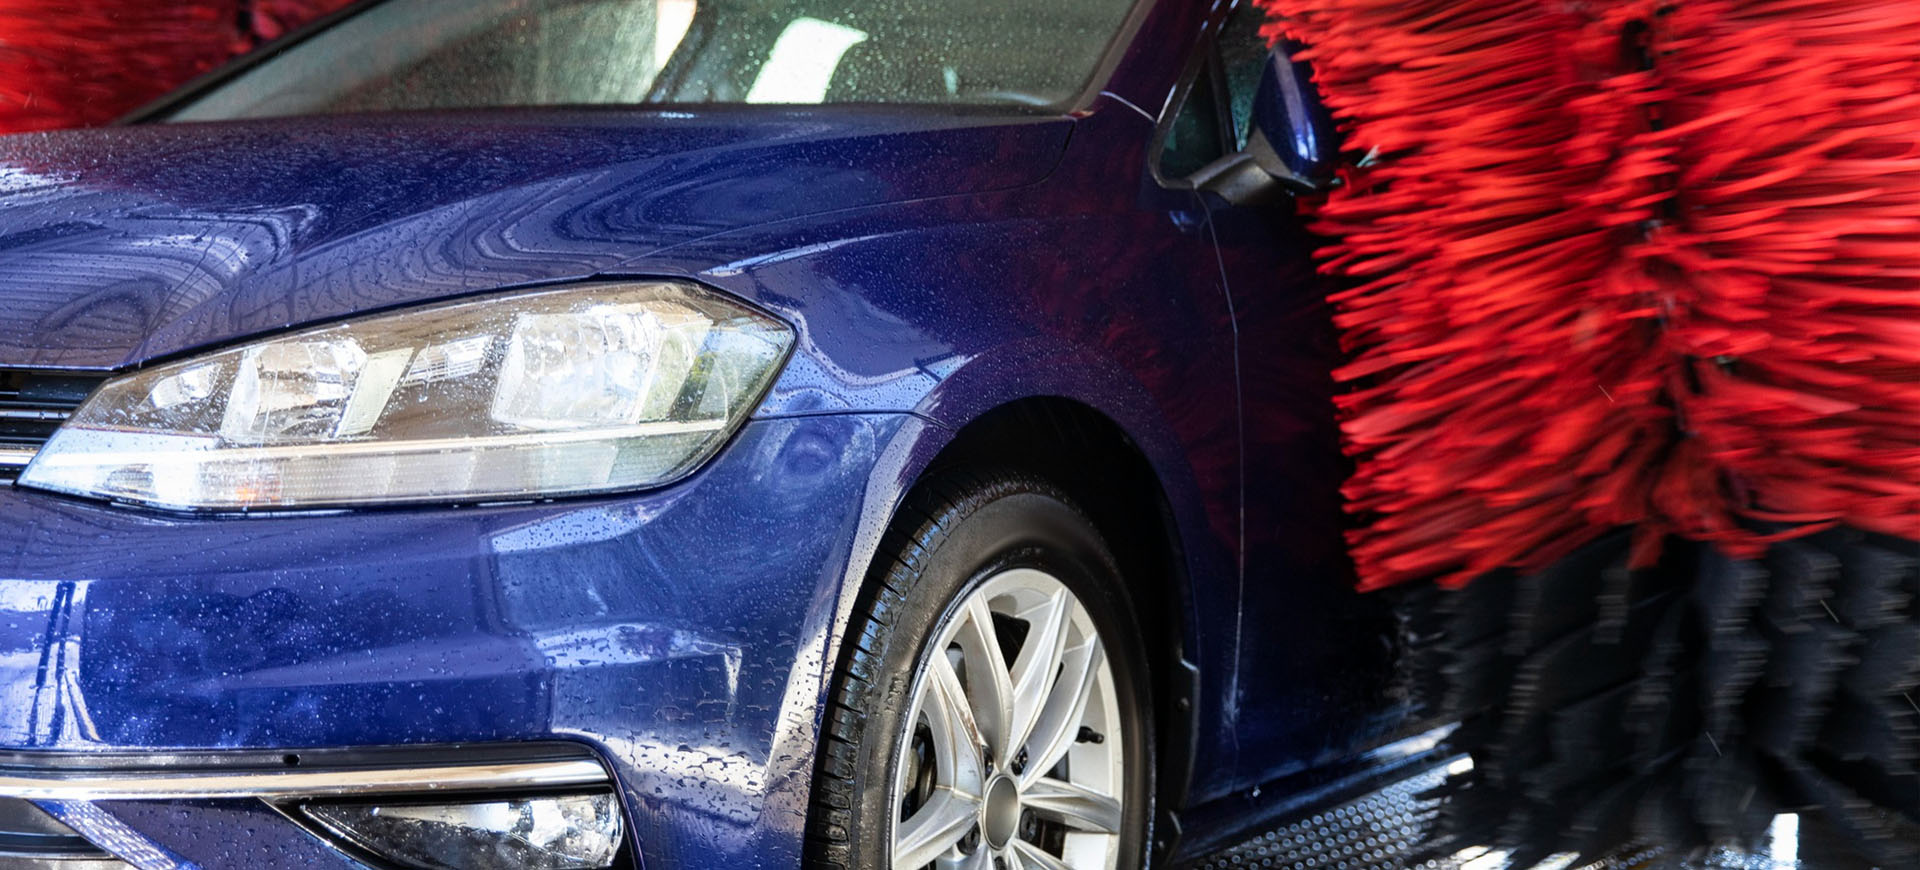 How Washing Your Car Regularly Helps It Run Better